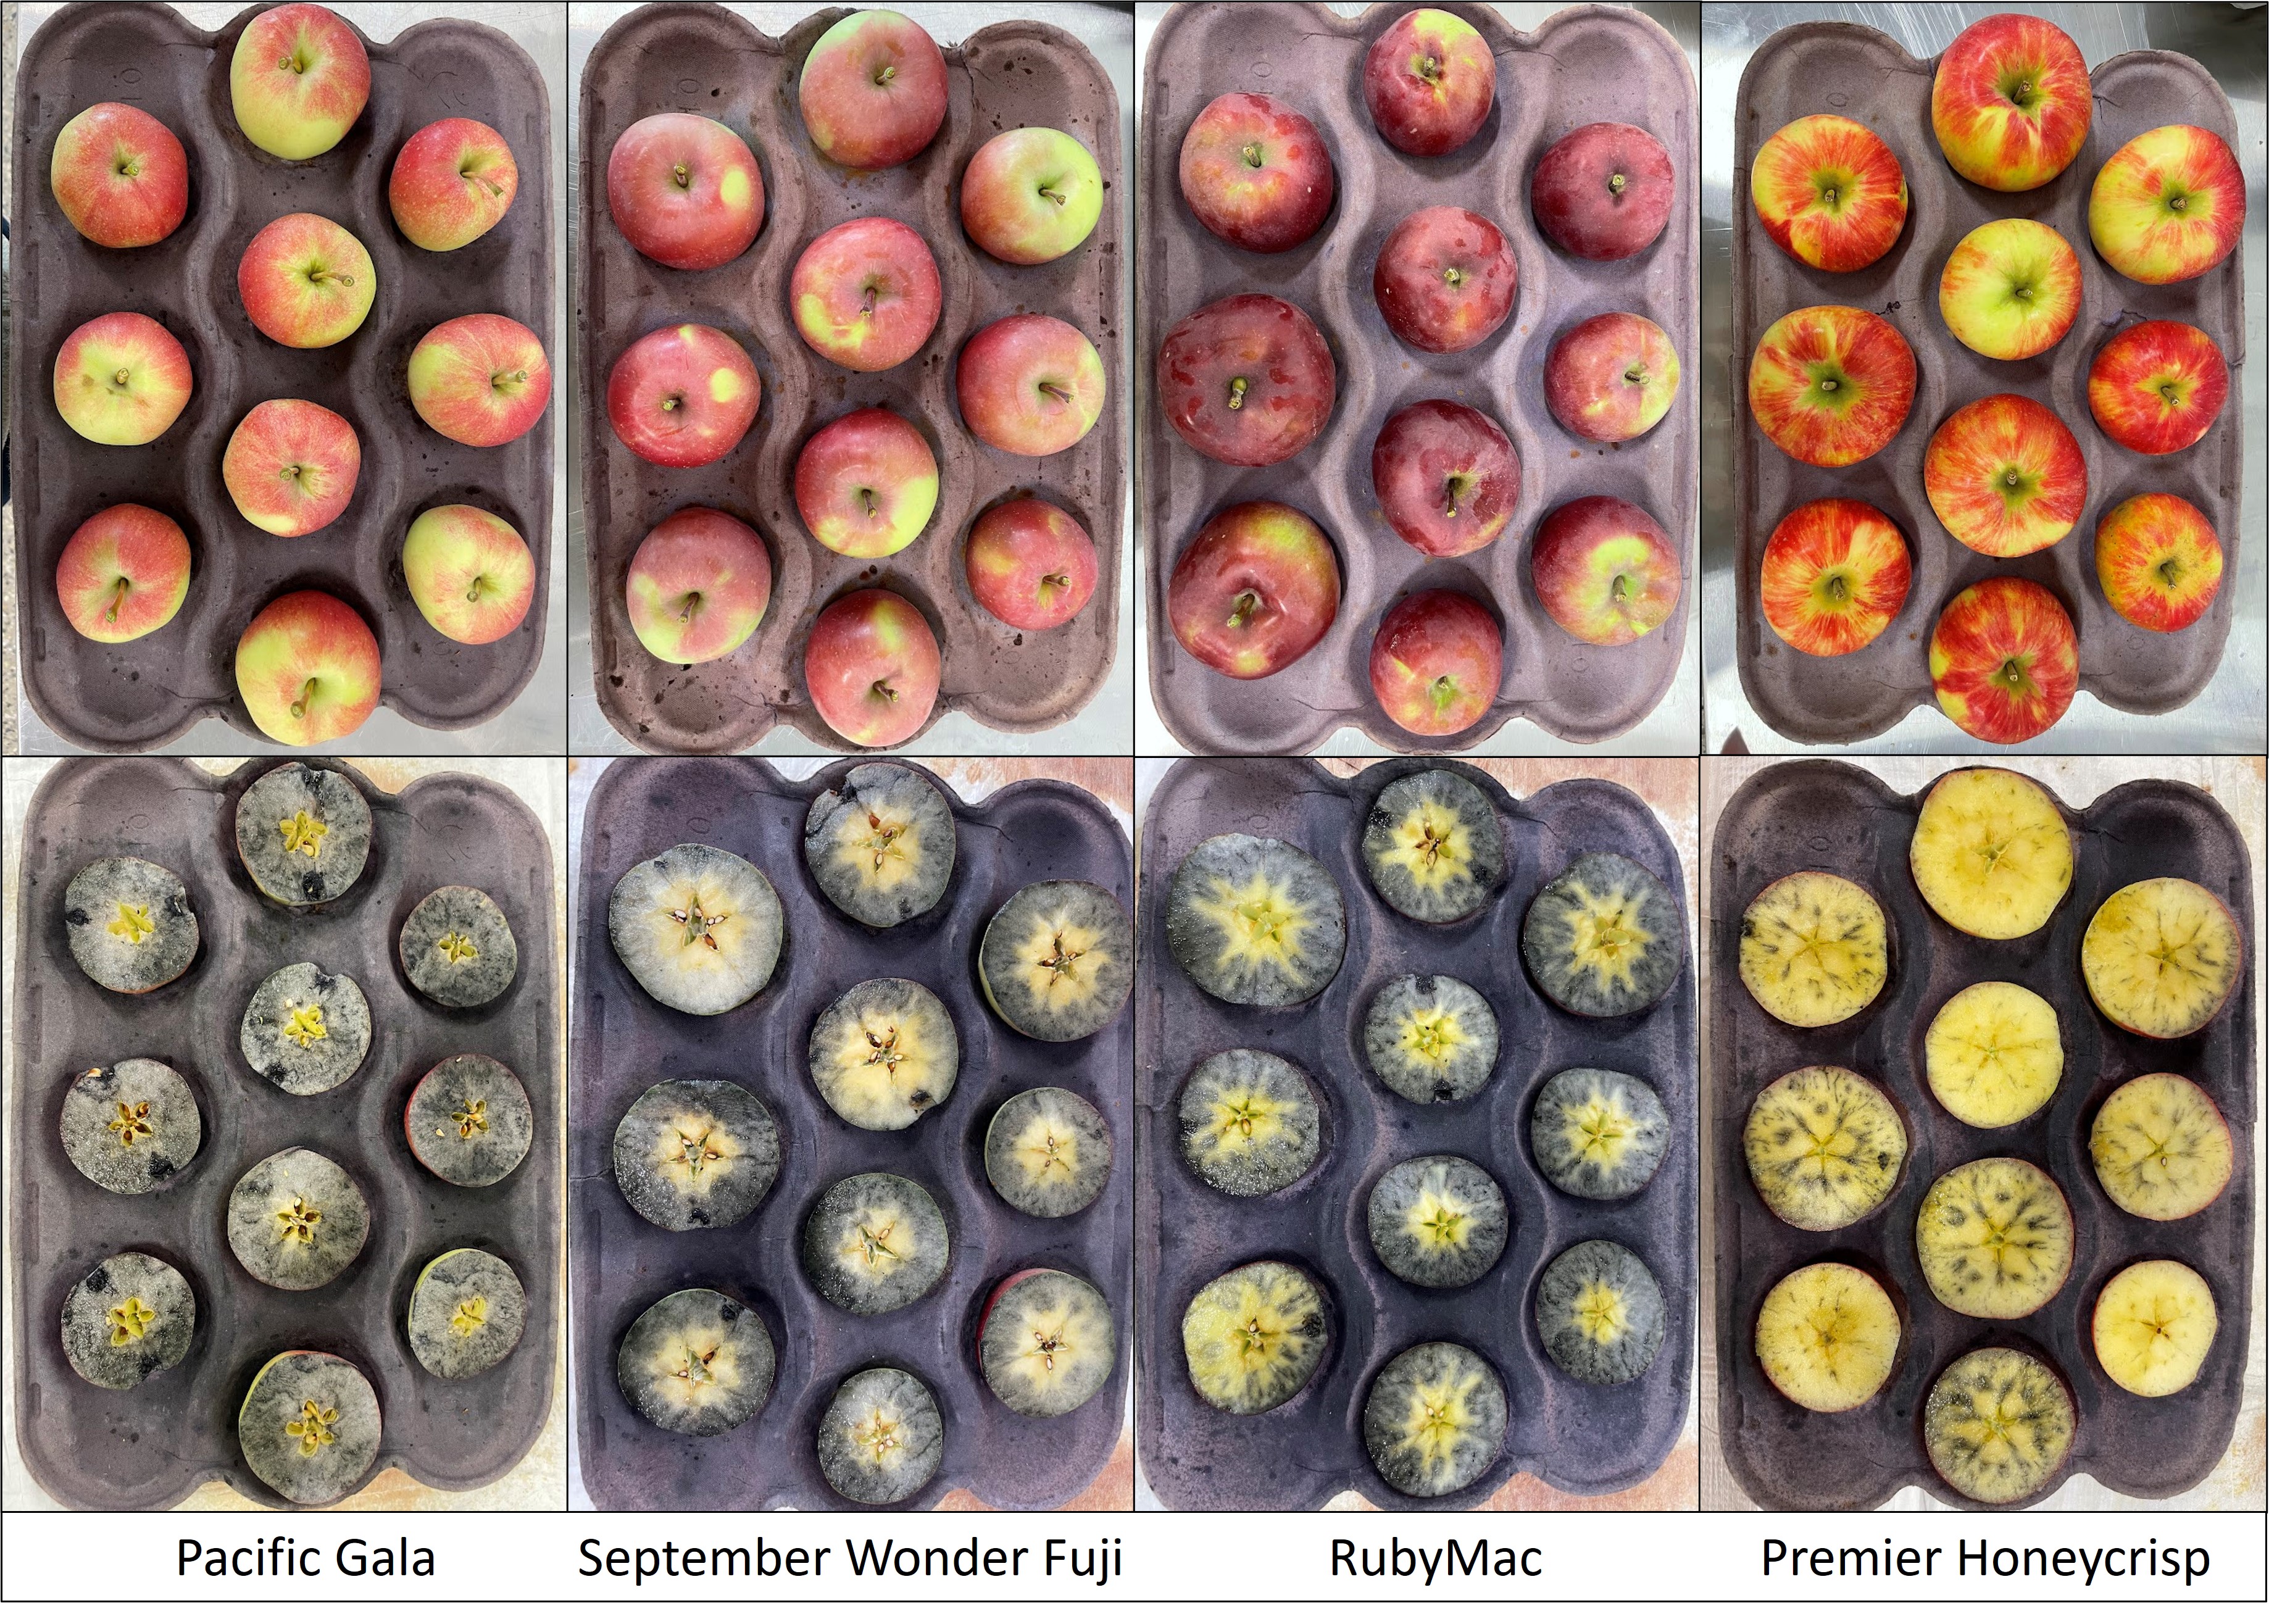 Different strains of apples in containers ready to be tested.